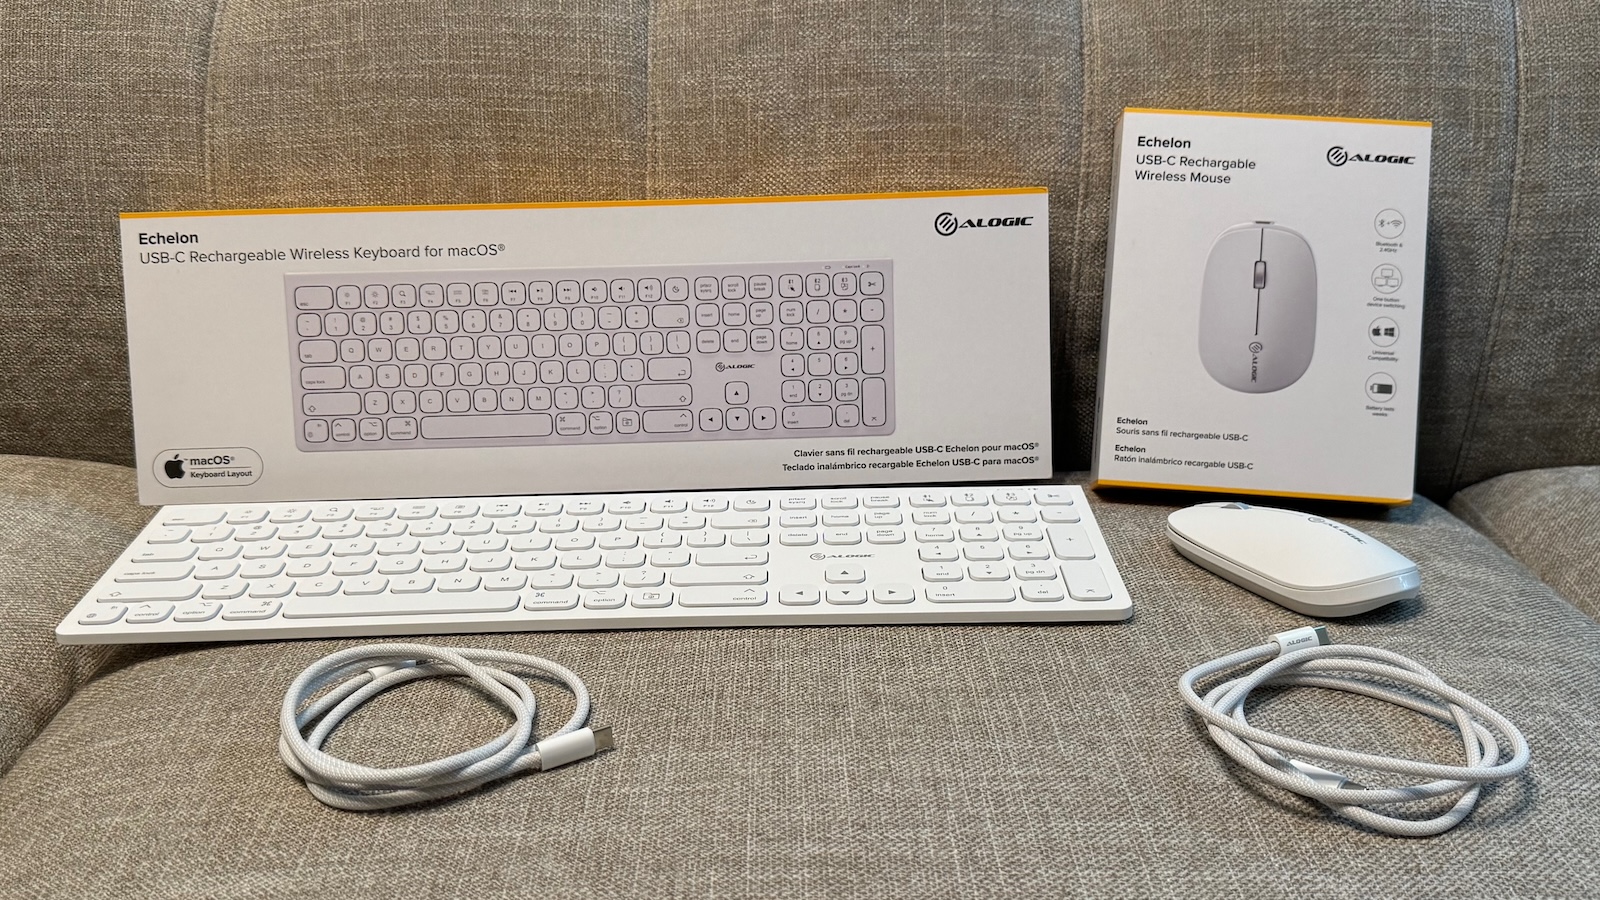 Alogic’s Echelon Series Delivers Budget-Friendly Keyboard and Mouse Accessories